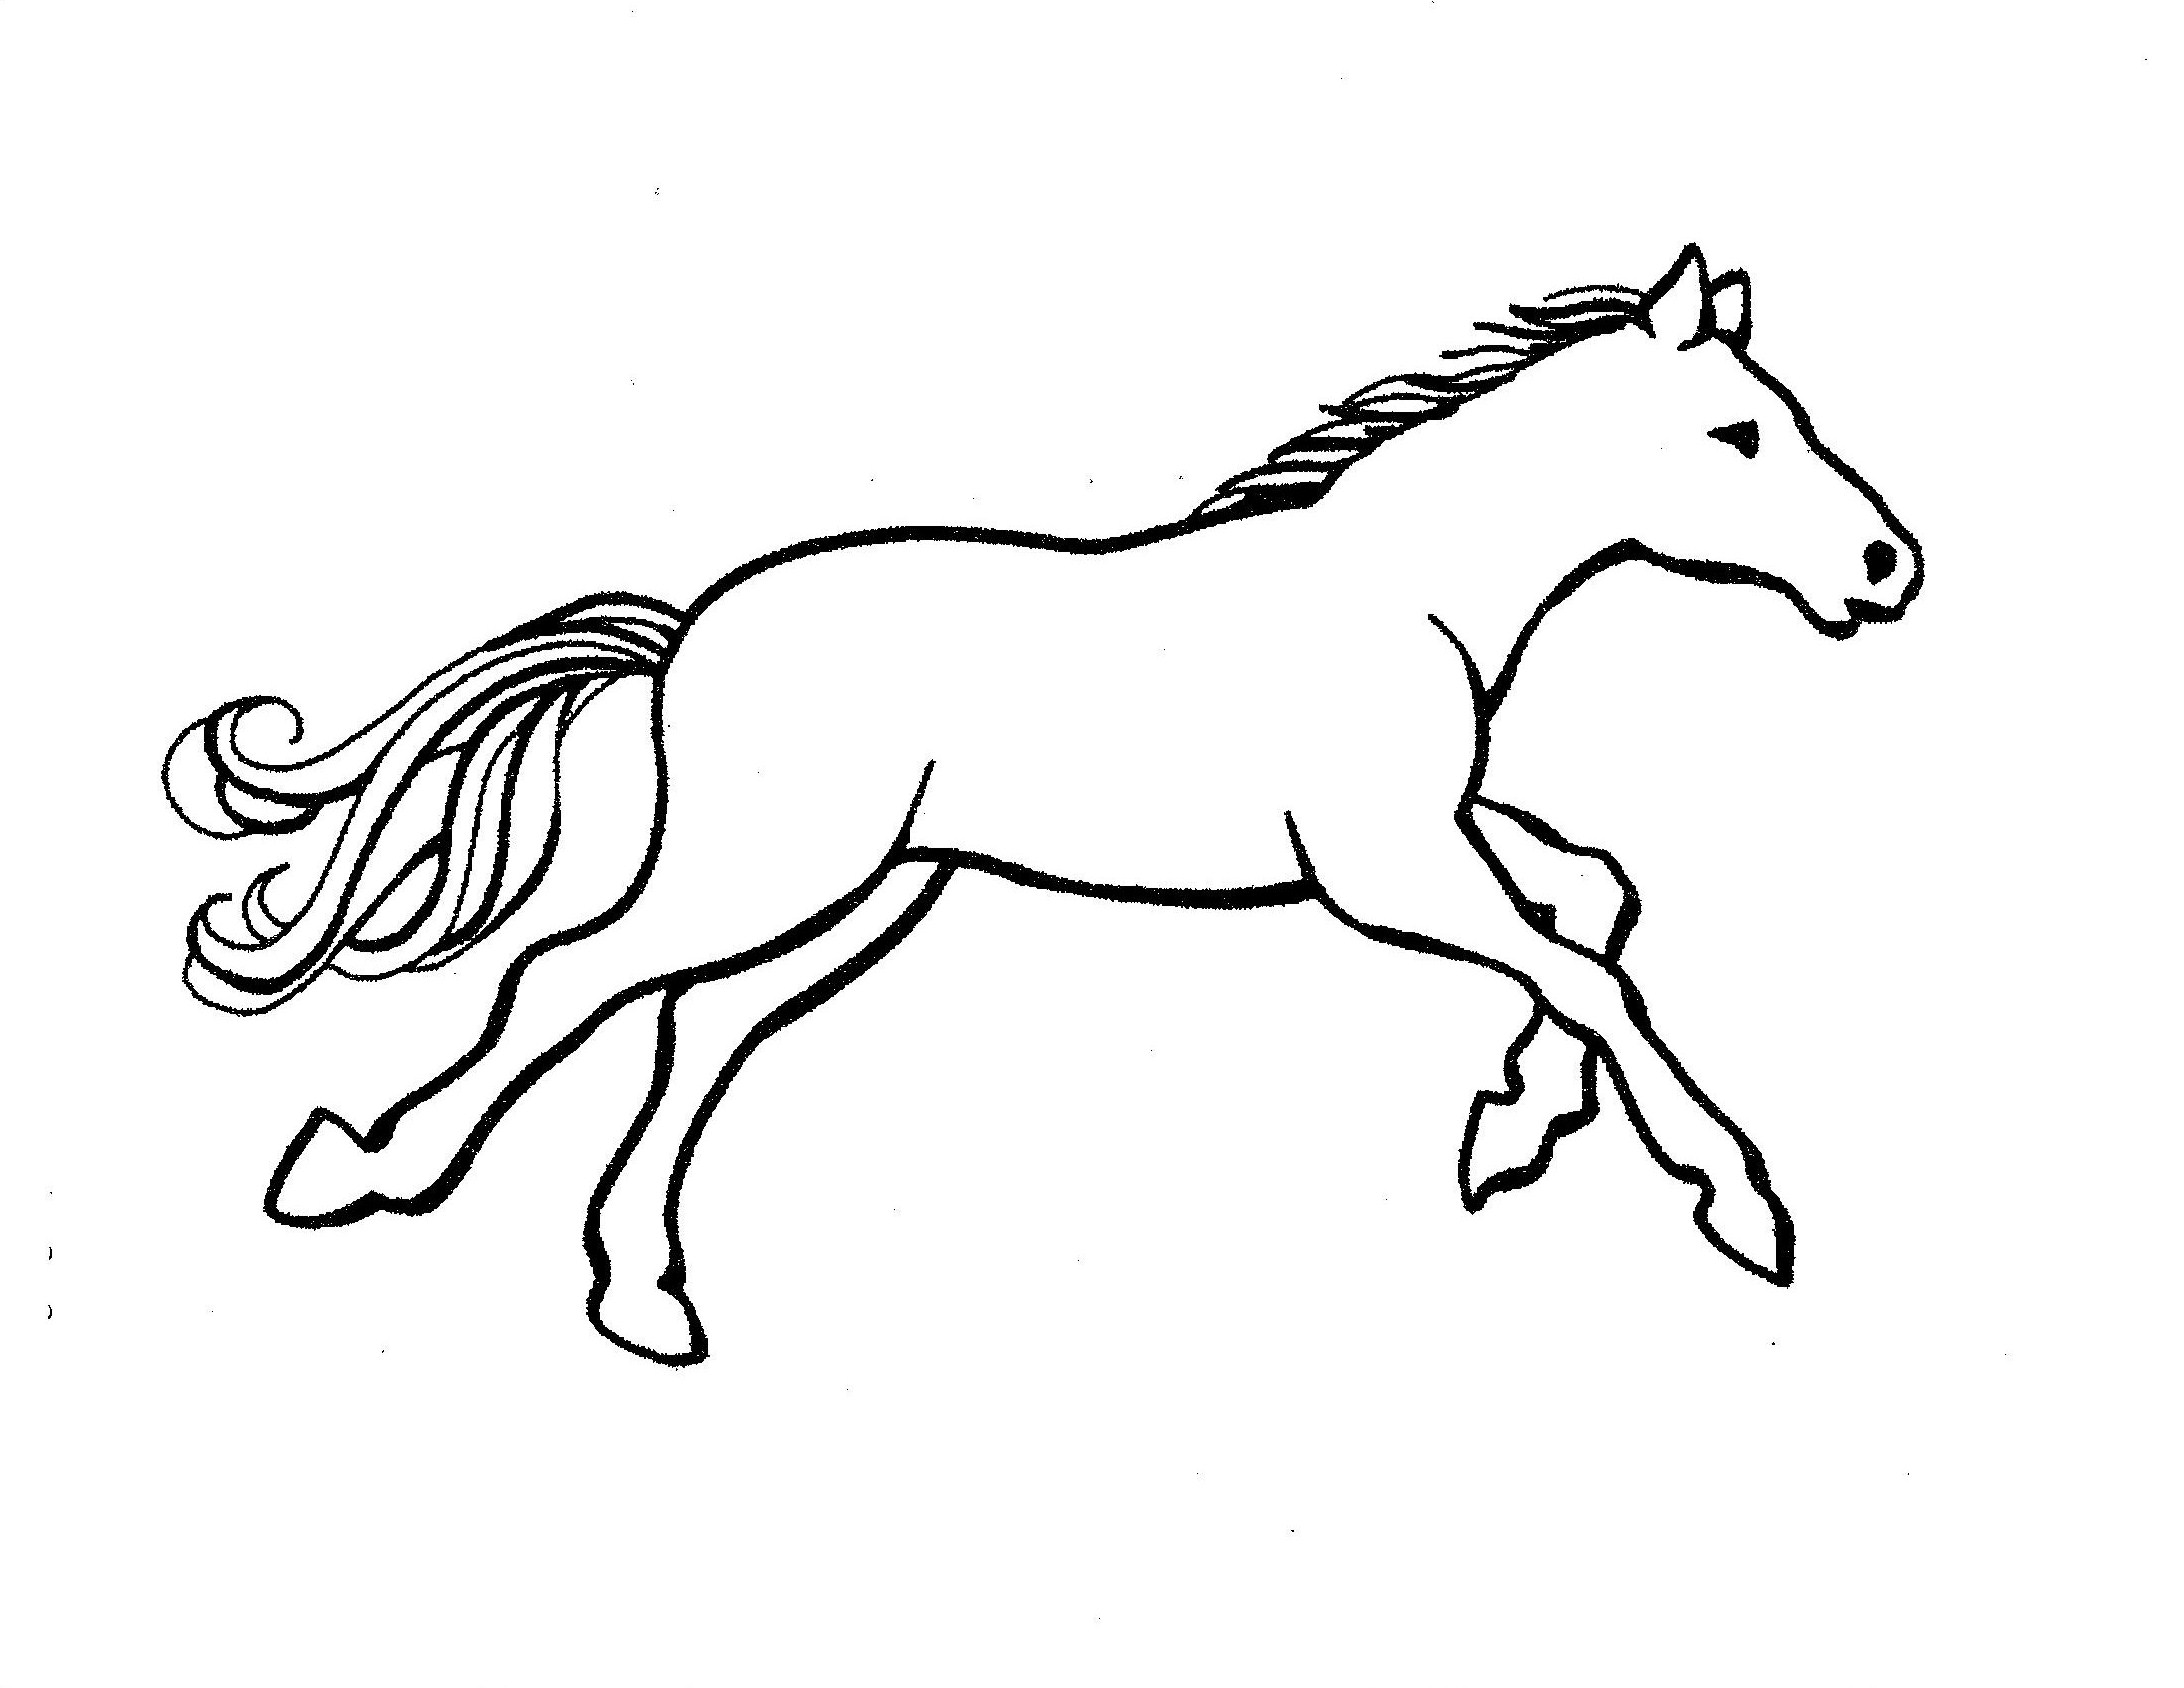 Free Printable Horse Stencils, Download Free Printable Horse Stencils